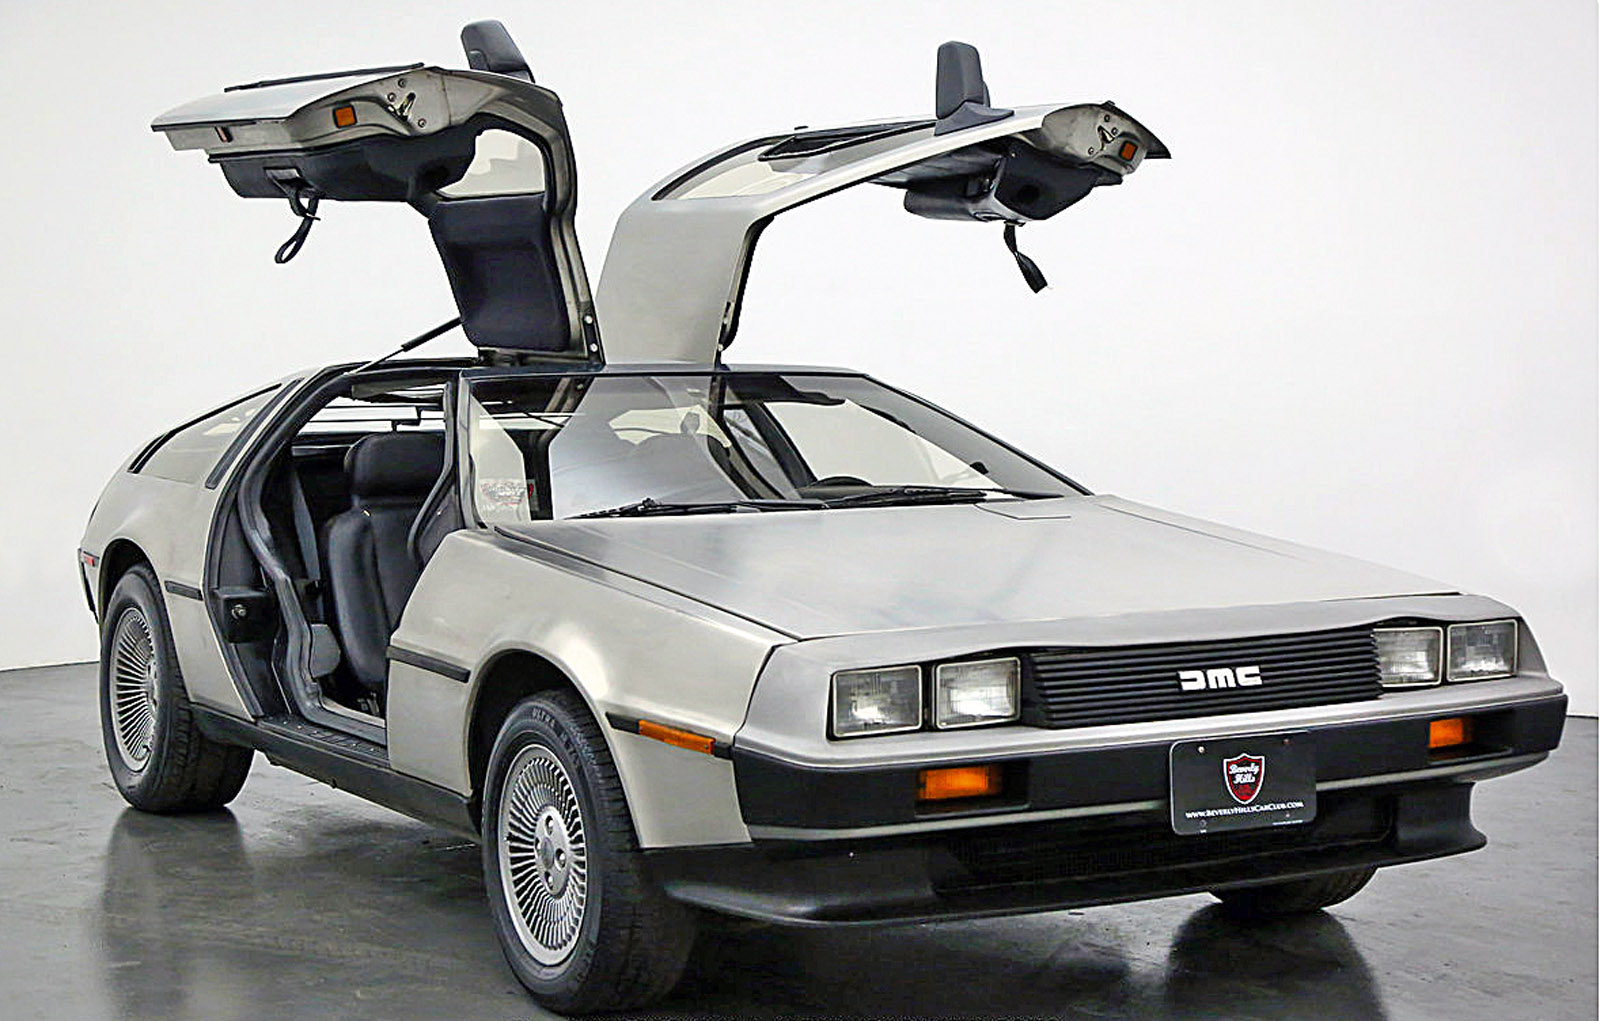 How Much Is A Delorean Car Worth How much do i have to pay for a good